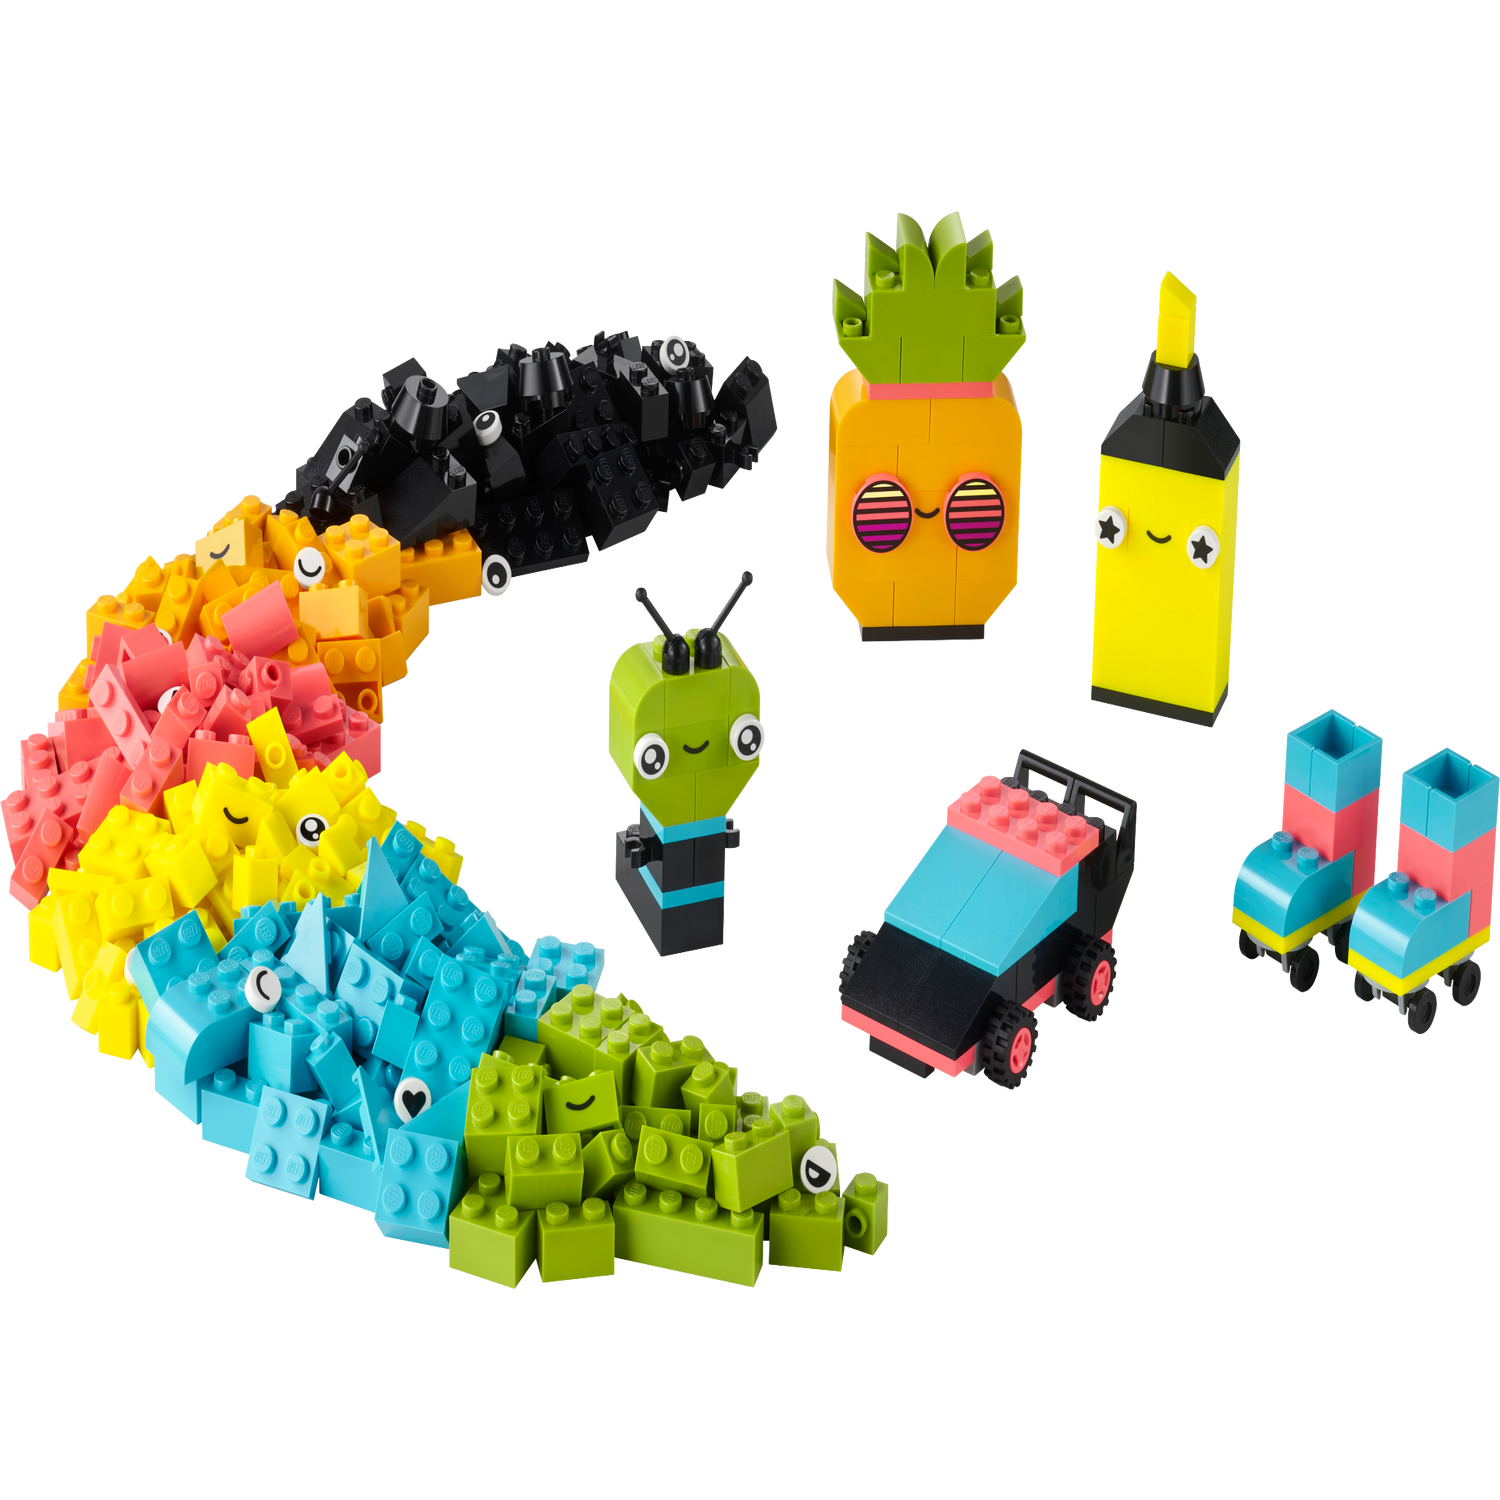 Creative Neon Fun 11027 | LEGO® Classic Official | online the US Shop Buy at